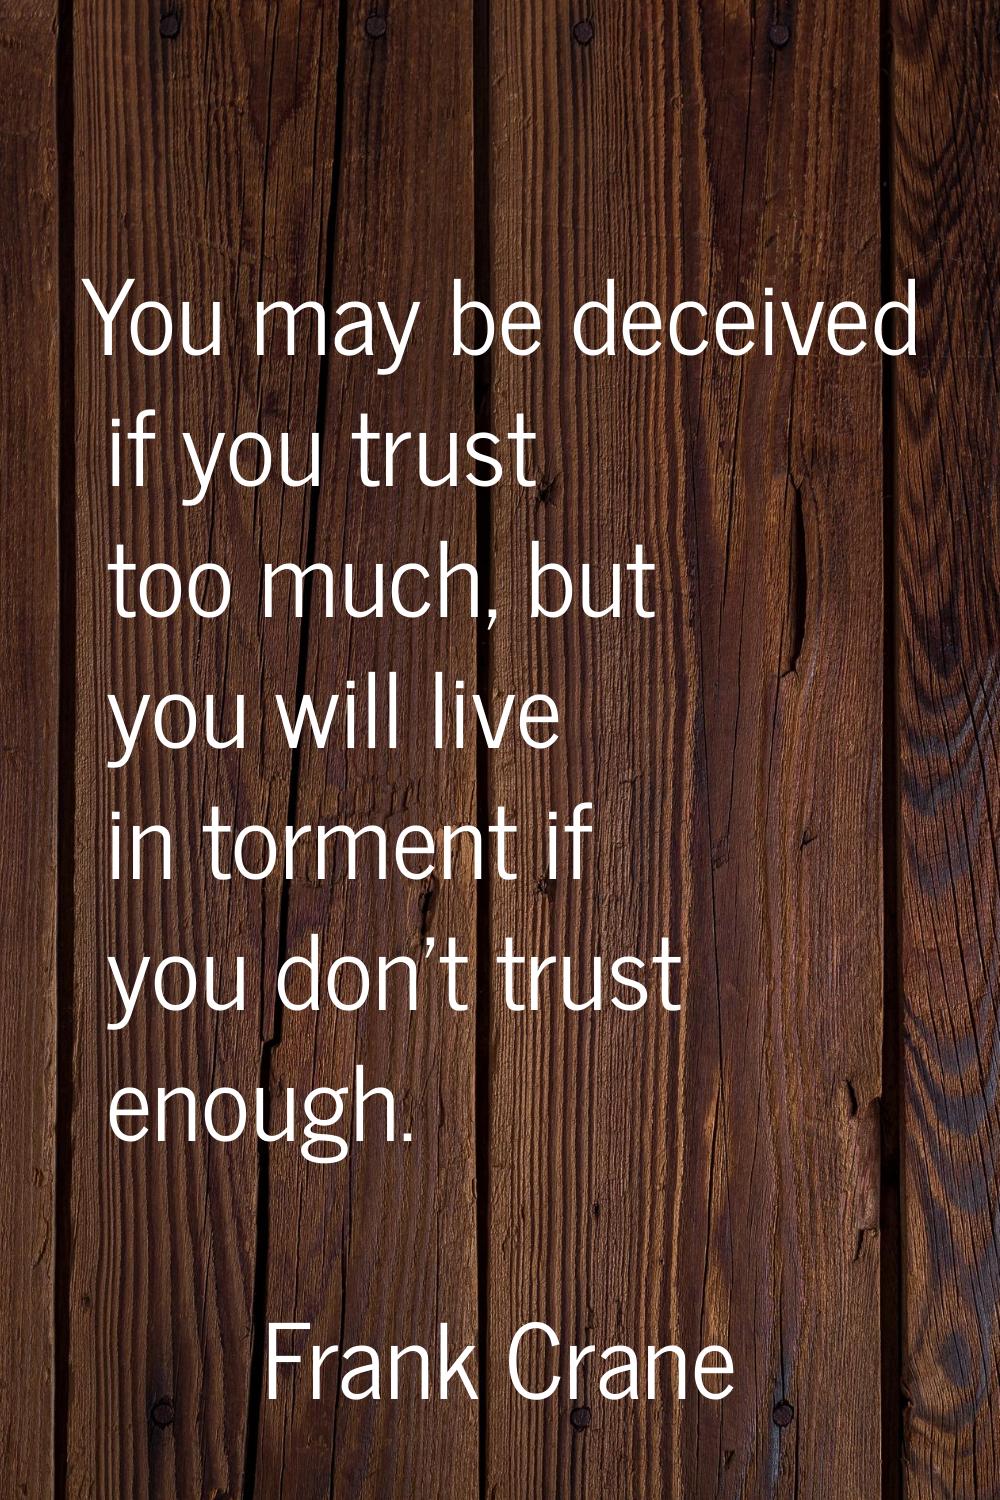 You may be deceived if you trust too much, but you will live in torment if you don't trust enough.